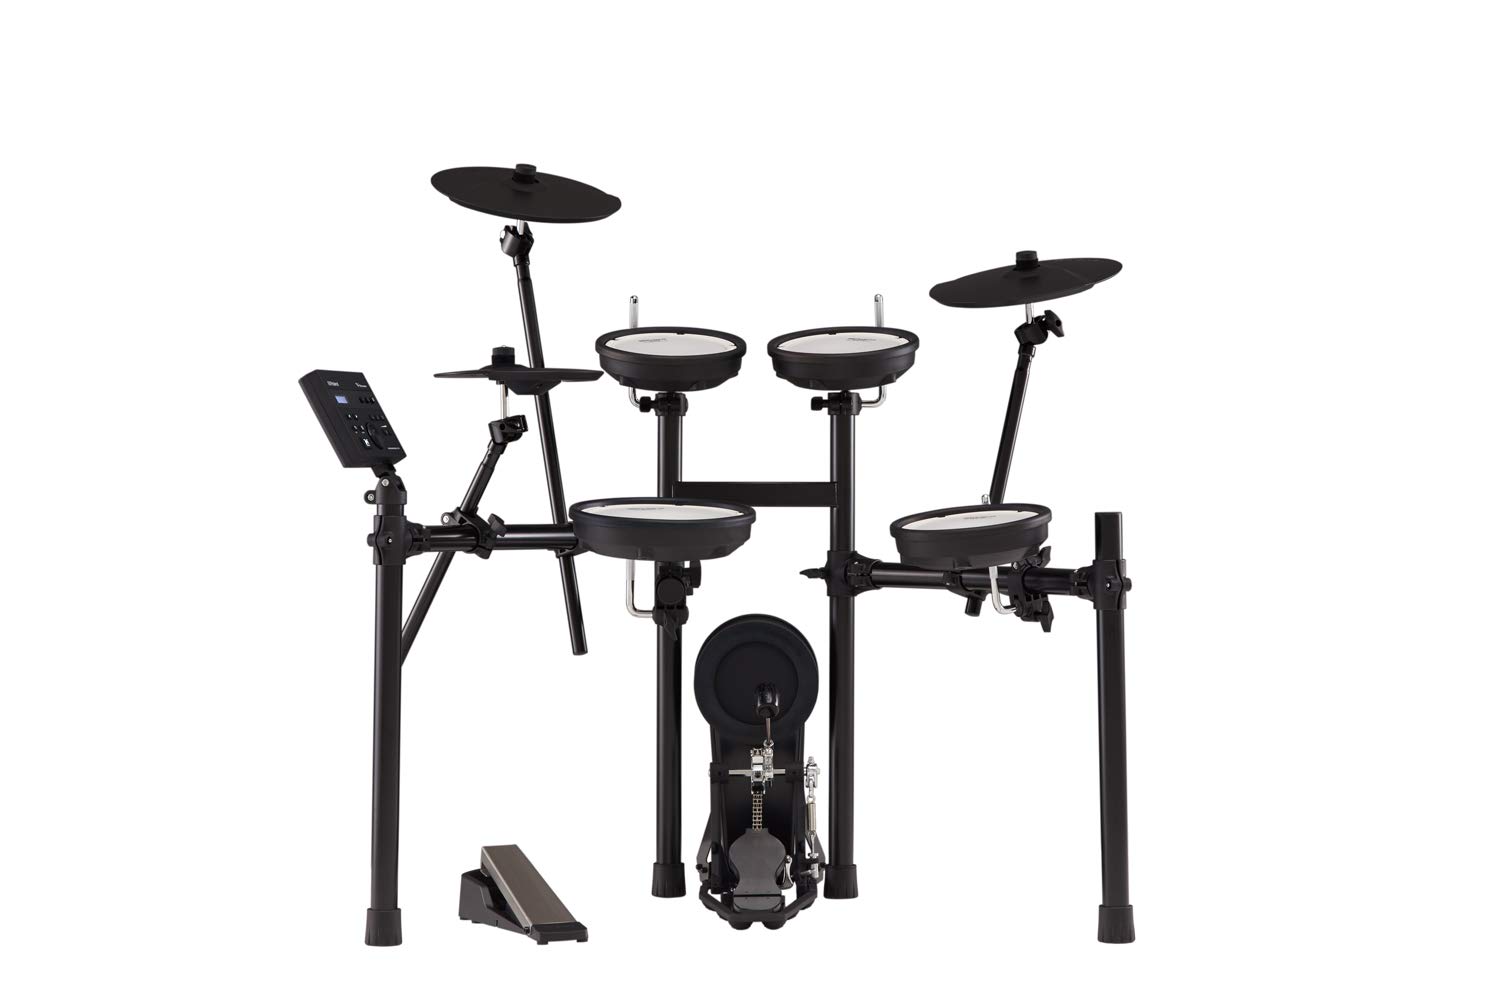  Roland  TD-07KV Electronic V-Drums Kit – Legendary Dual-Ply All Mesh Head kit with superior expression and playability – Bluetooth Audio & MIDI – USB for recording audio and MIDI data – 40 FREE...